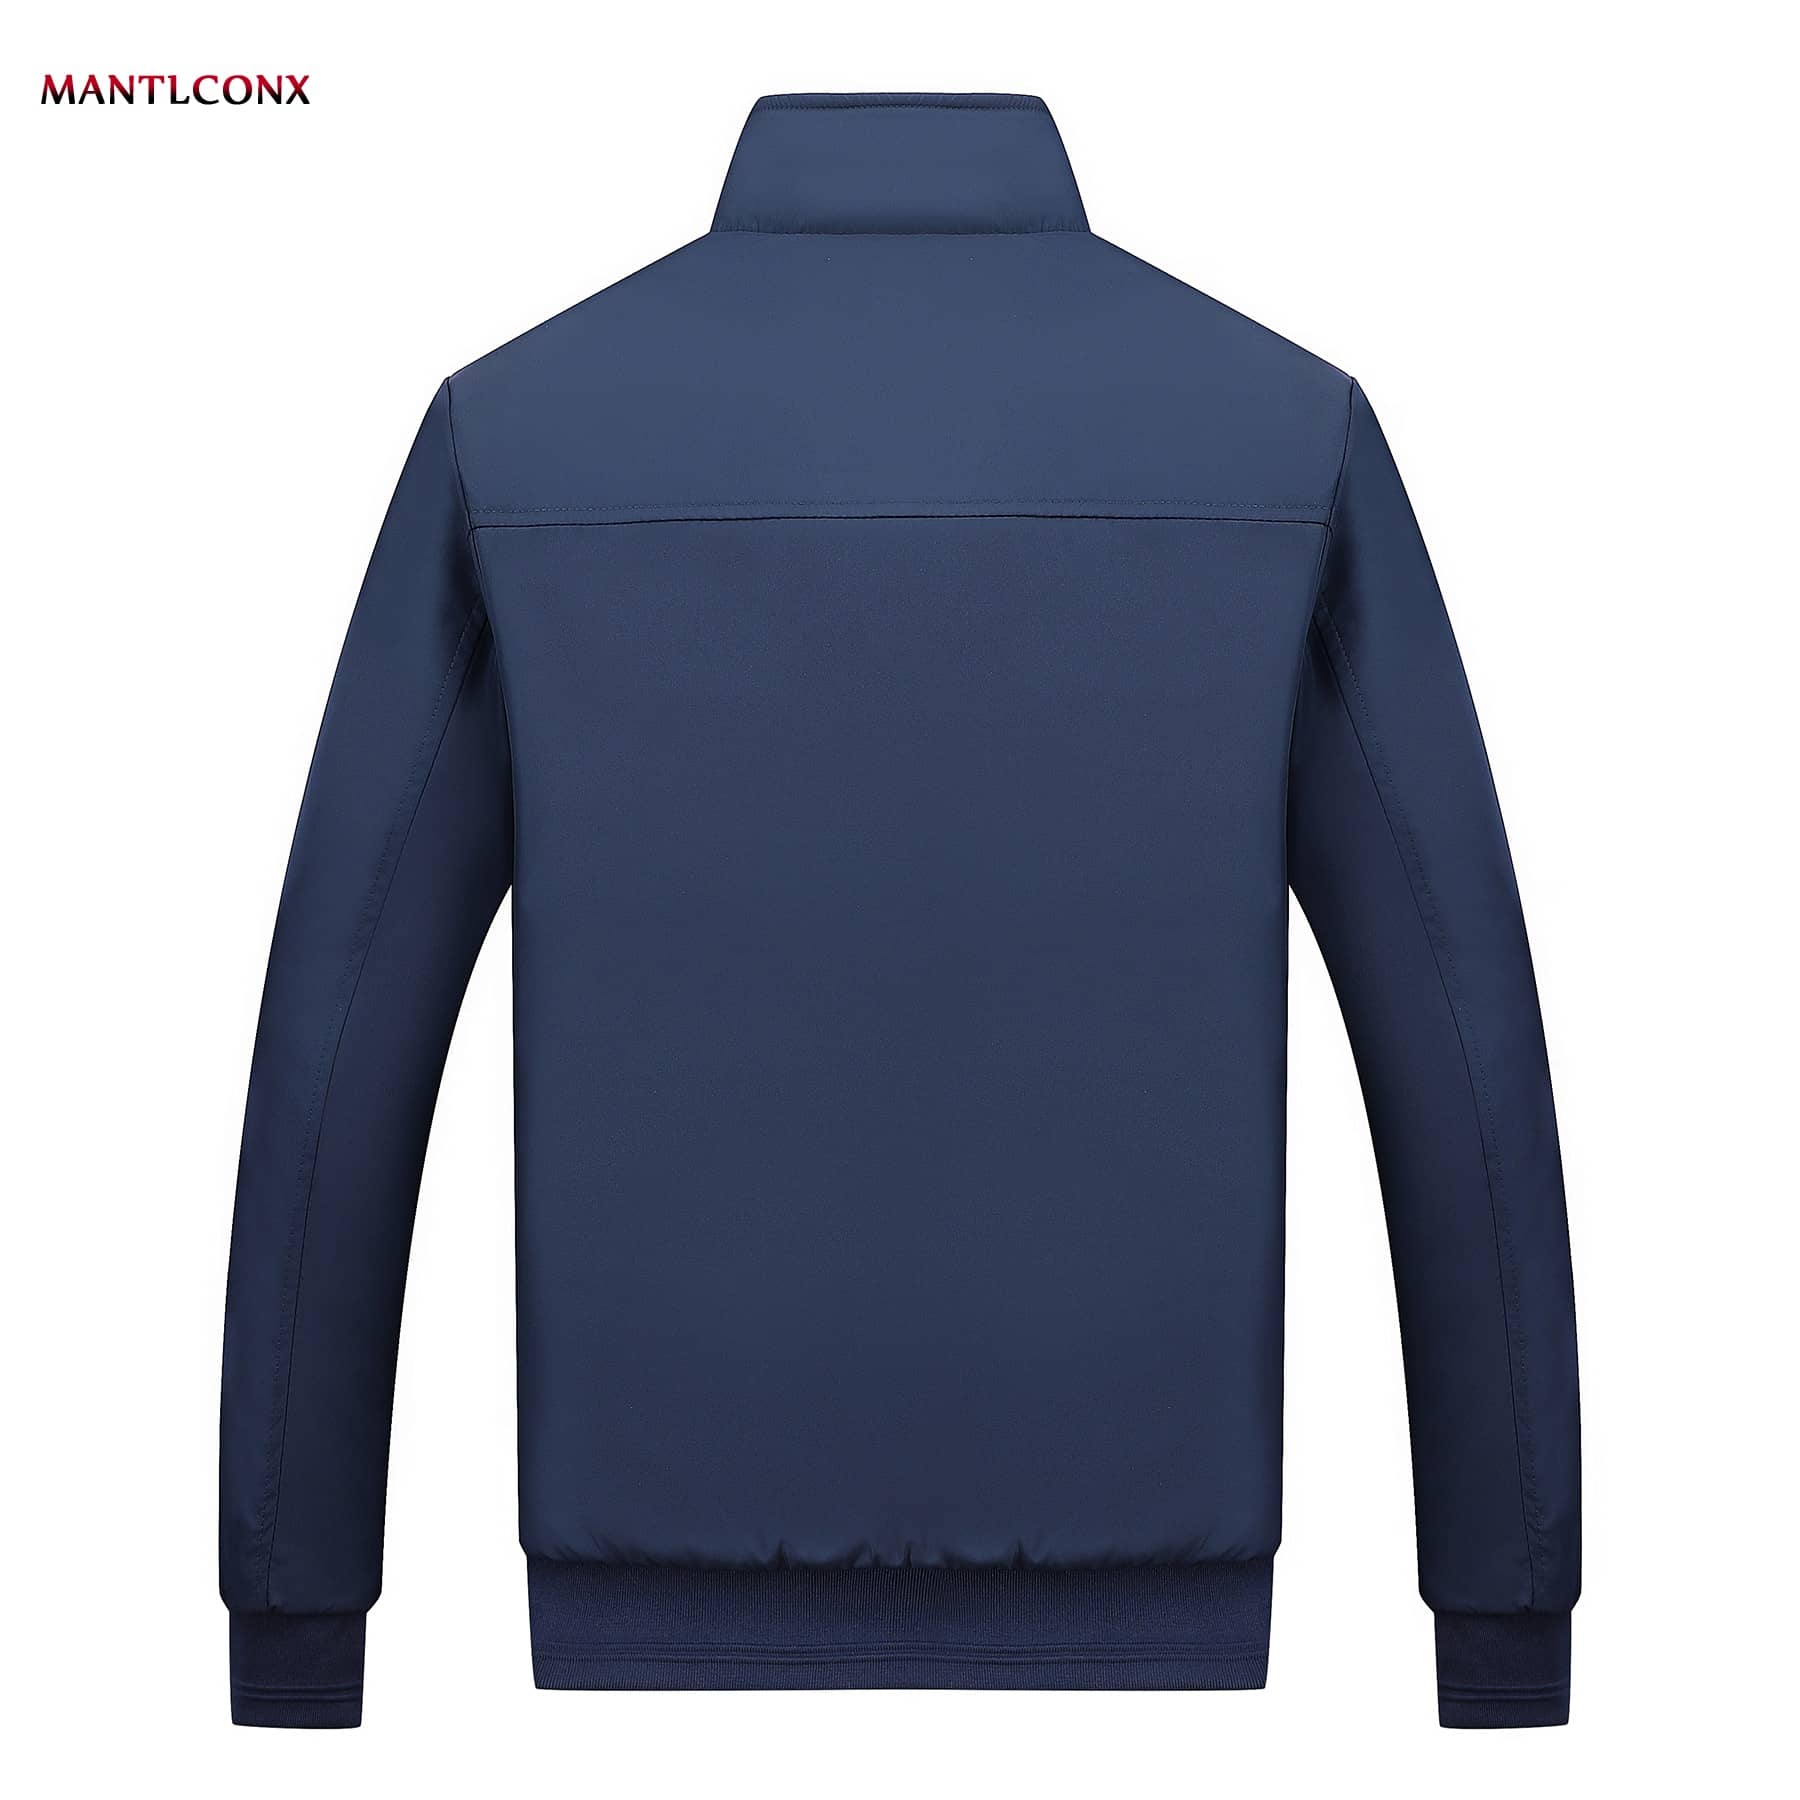 MANTLCONX Winter Jacket Men 2020 Brand Casual Mens Jackets and Coats Thick Men Outwear Jacket Male Clothing Fleece Thicken Coats